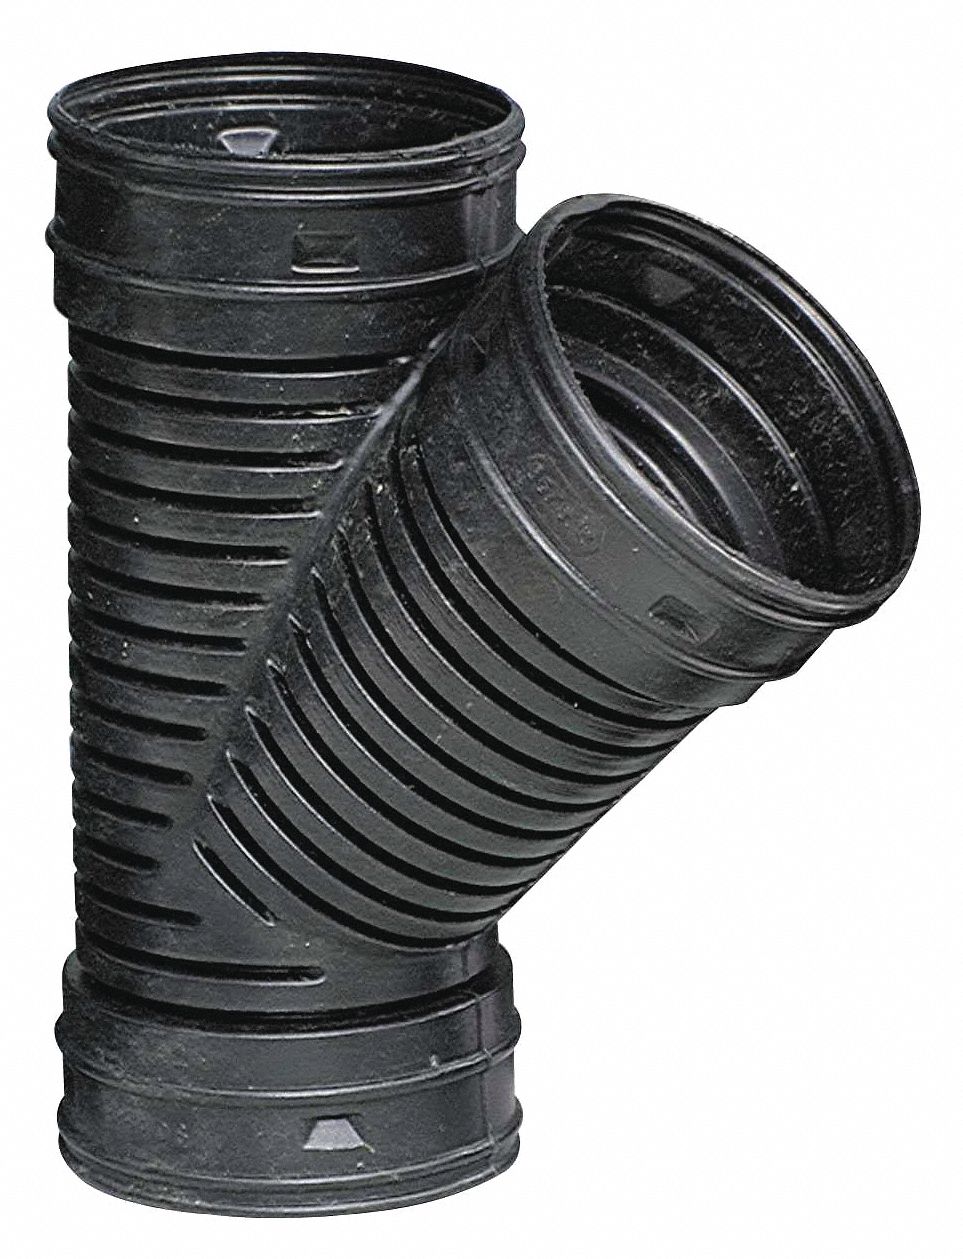 Wye: 4 in x 4 in x 4 in Fitting Pipe Size, Single, Snap Lock, 10 in Overall Lg, Schedule 80, Black